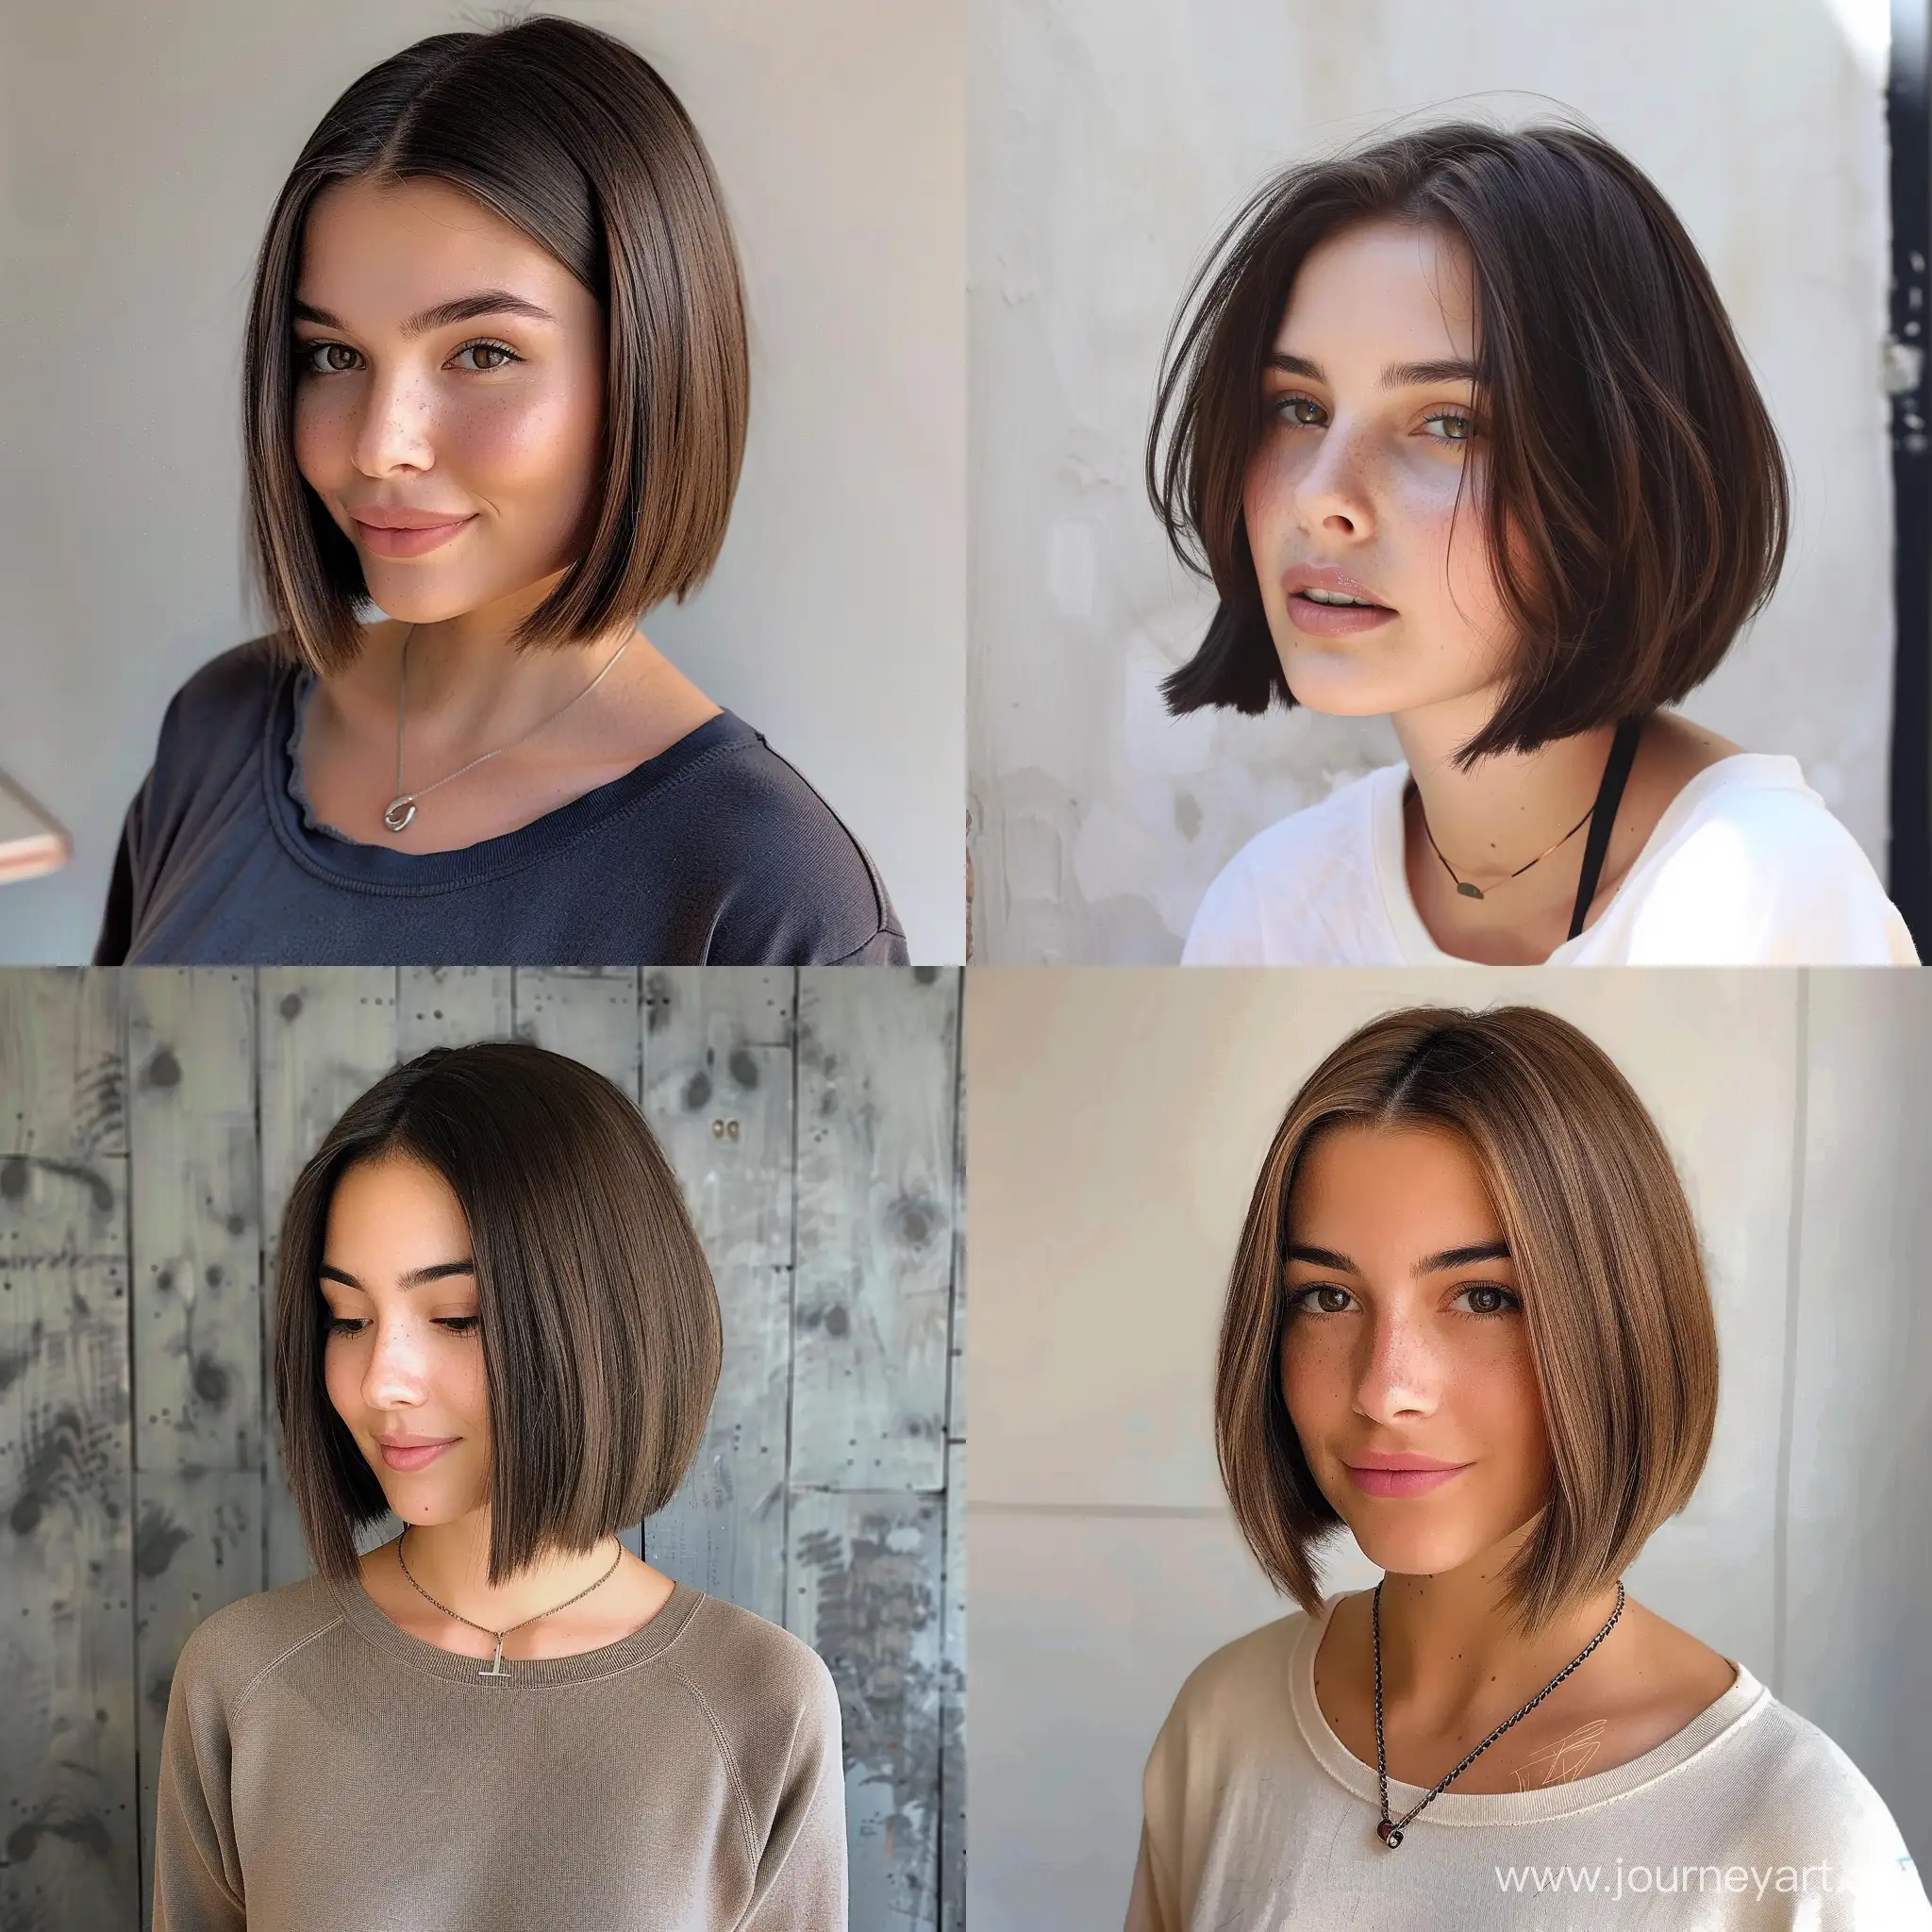 Brunette-Woman-with-Bob-Hairstyle-Chic-Instagram-Portrait